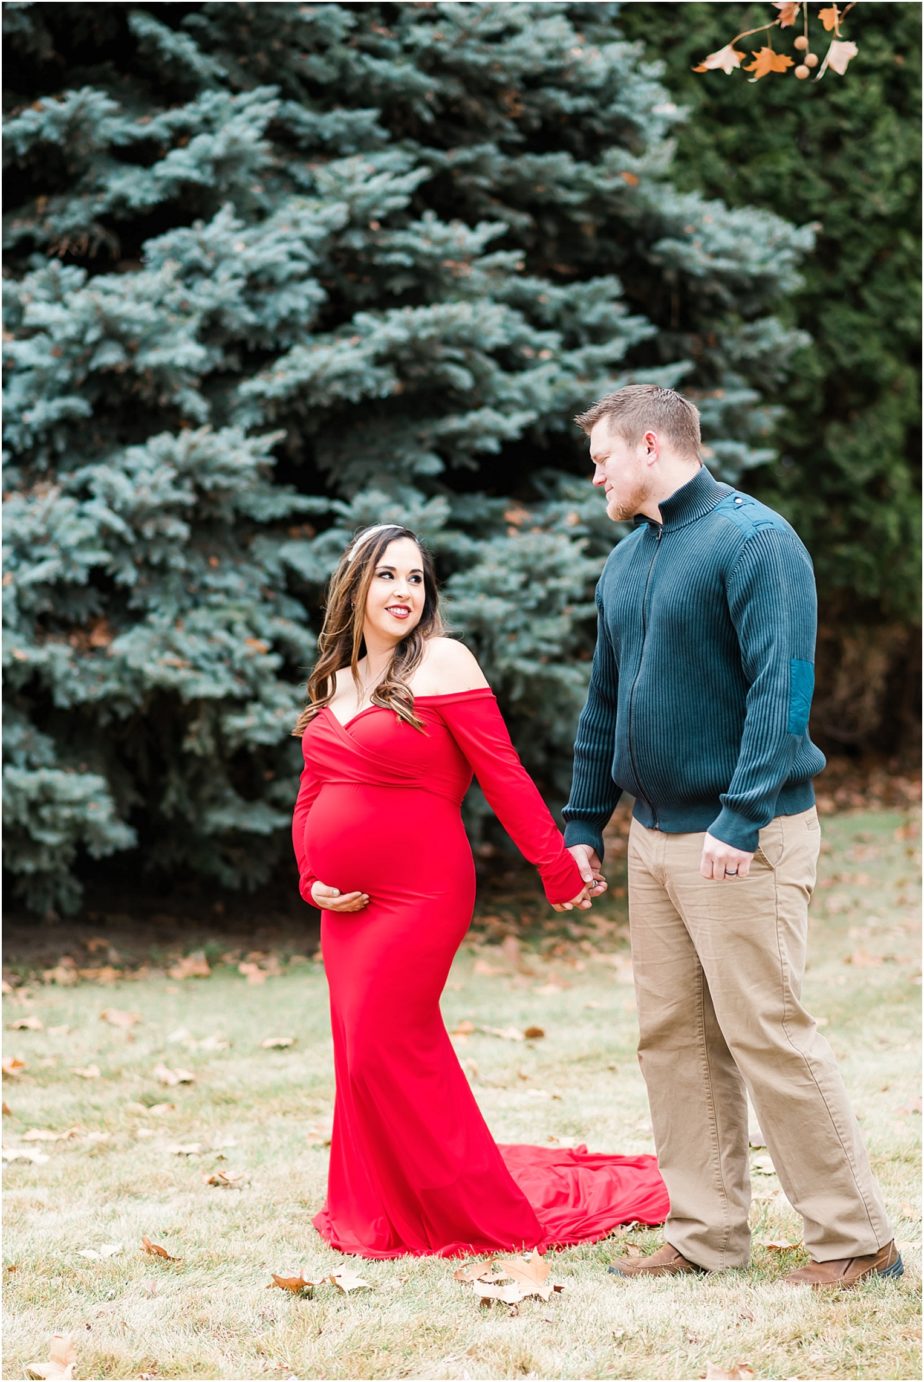 Maries maternity session prenant woman in long red dress with husband